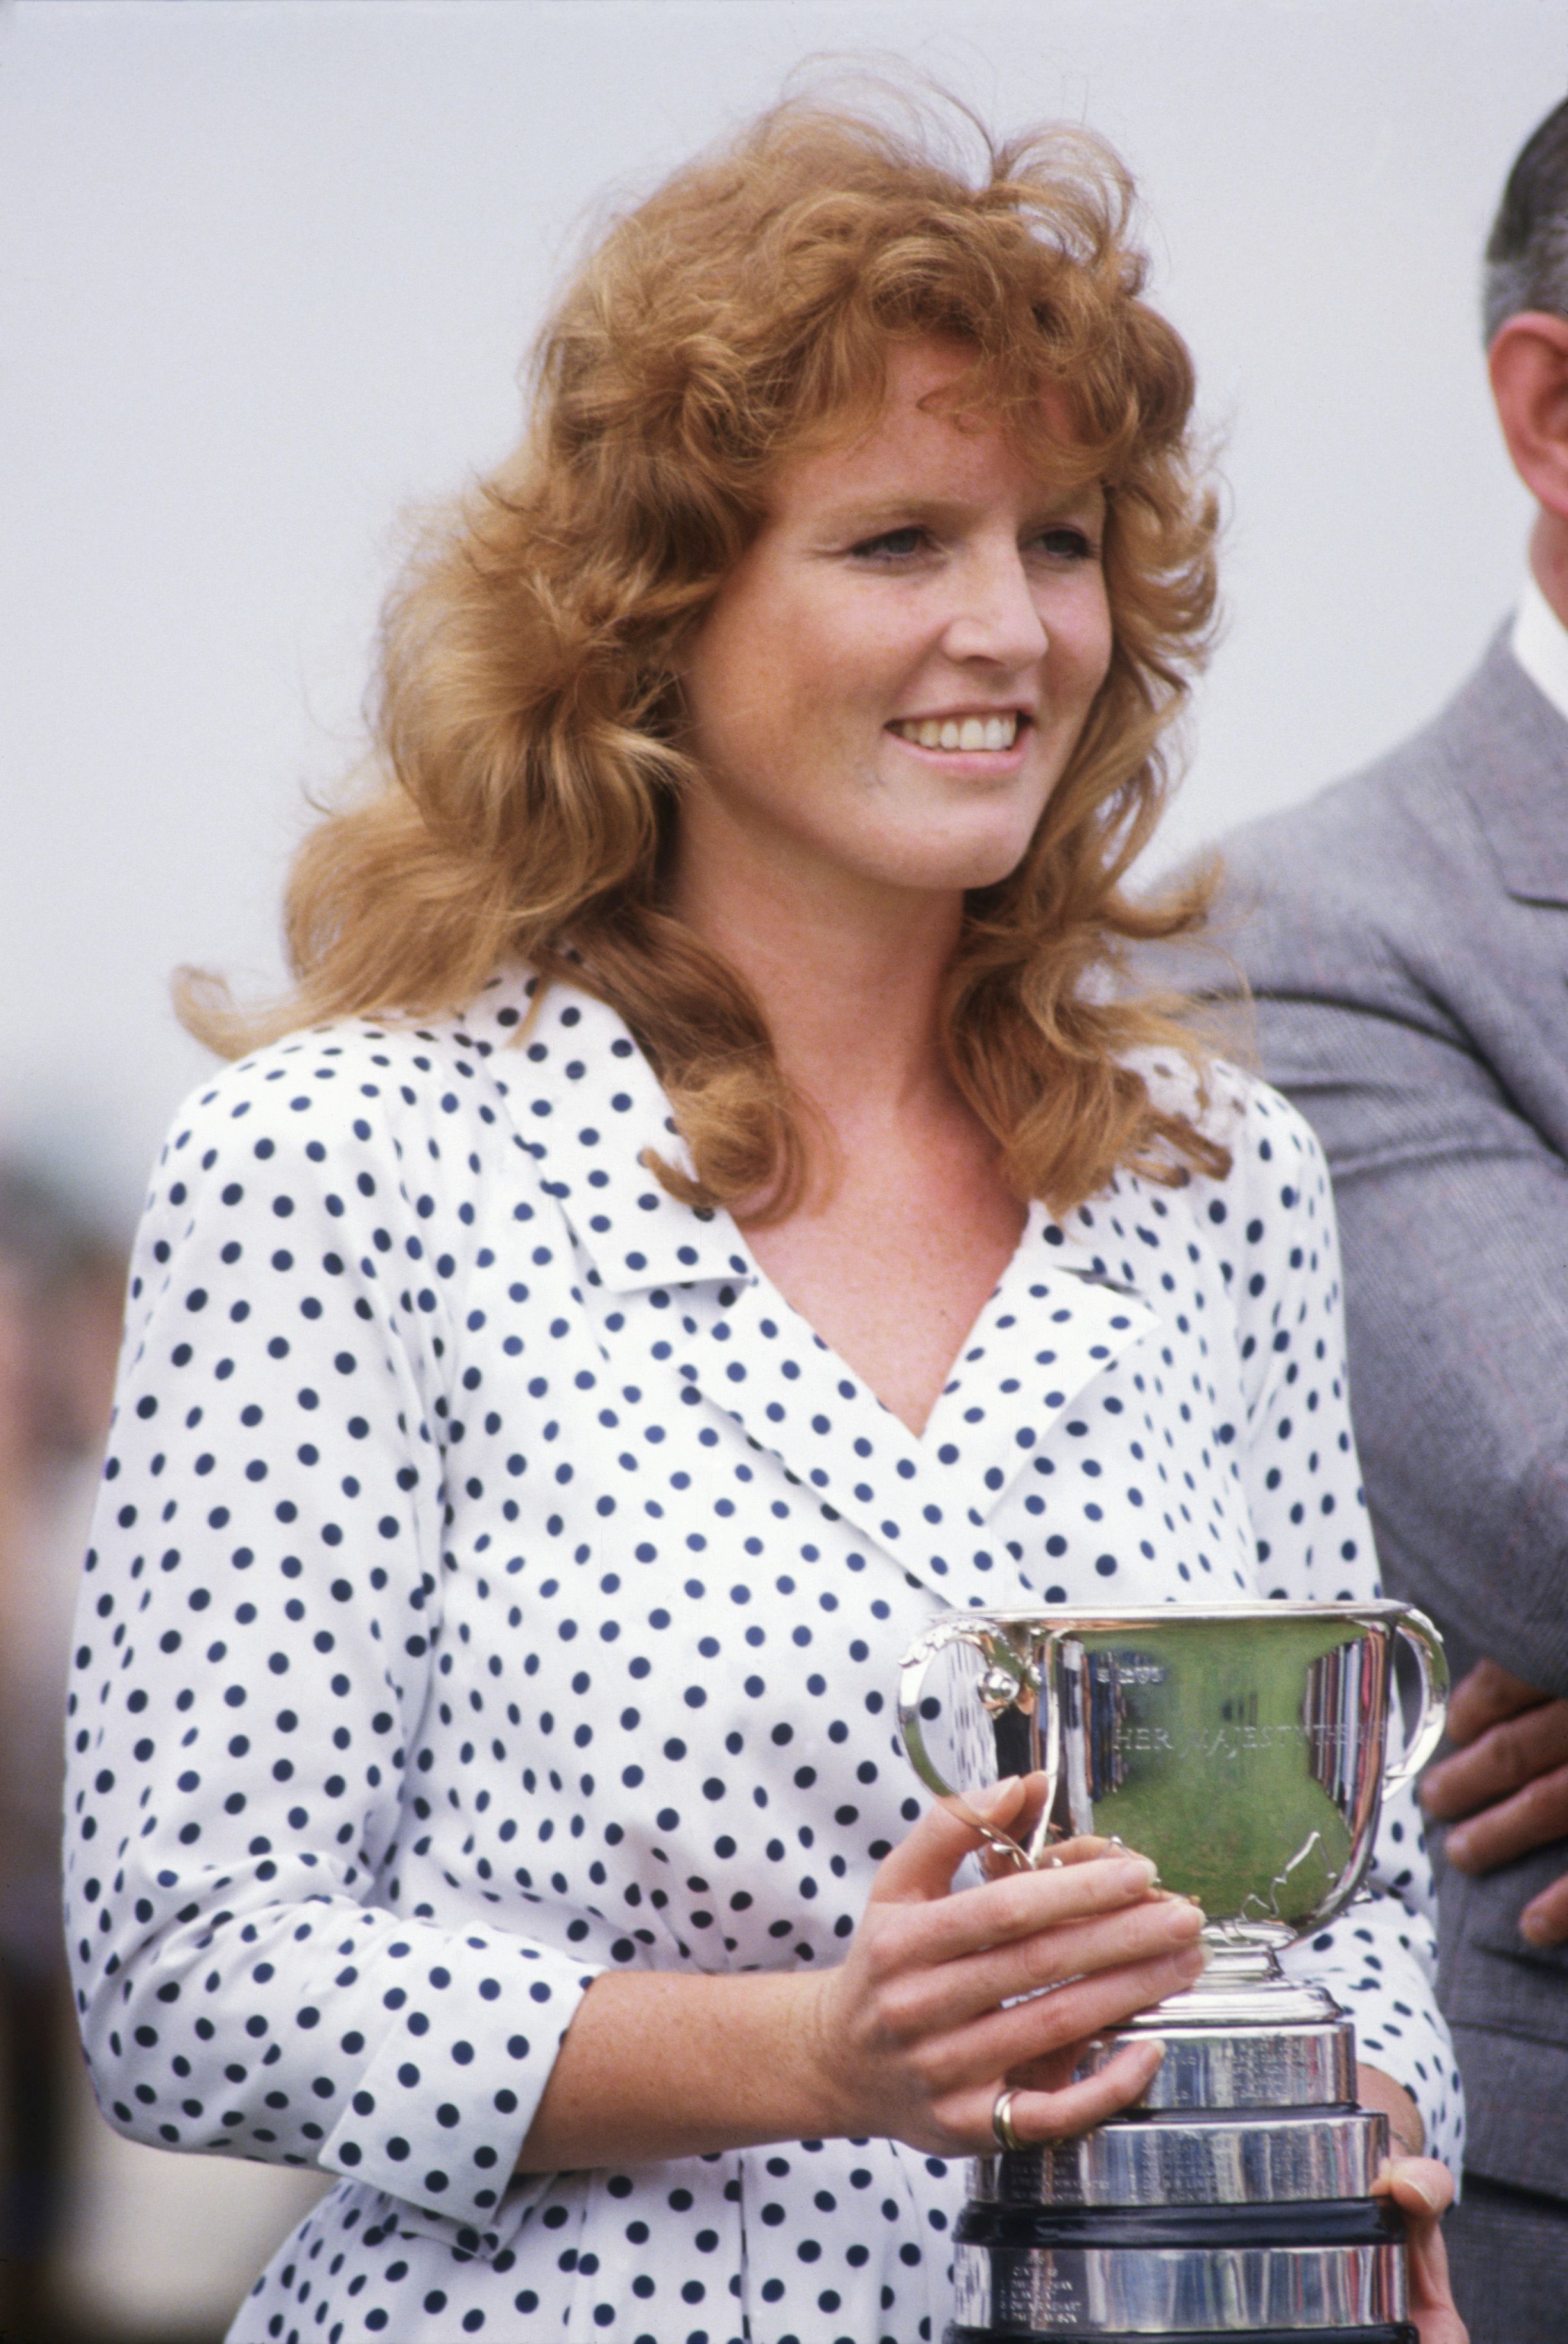 Sarah Ferguson during a polo match on June 8, 1986 at Guards Polo Club, Smiths Lawn, Windsor, Berkshire. | Source: Getty Images